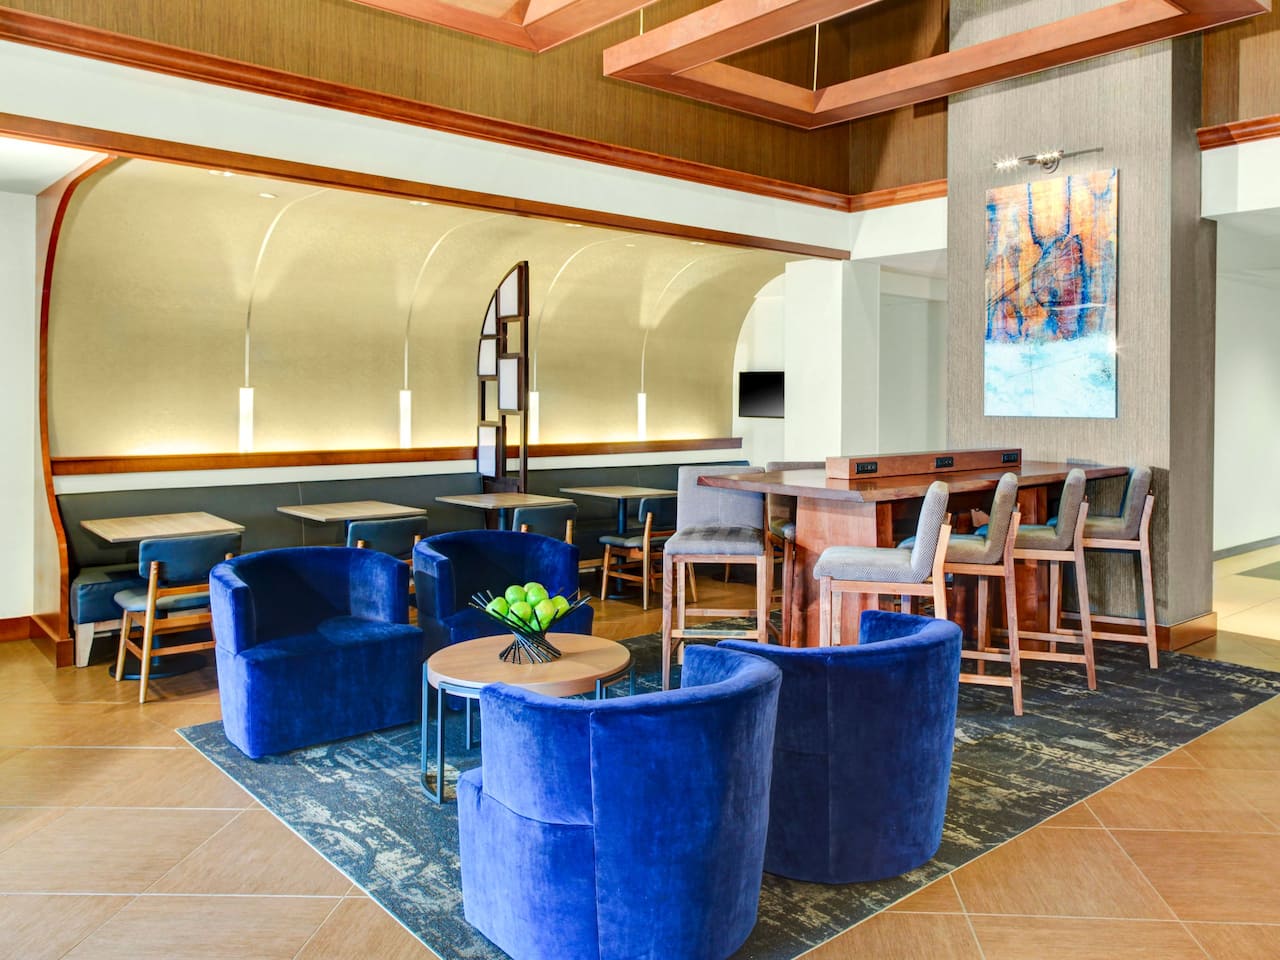 Lobby seating area with chairs, tables, and painting at Hyatt Place Detroit / Auburn Hills 